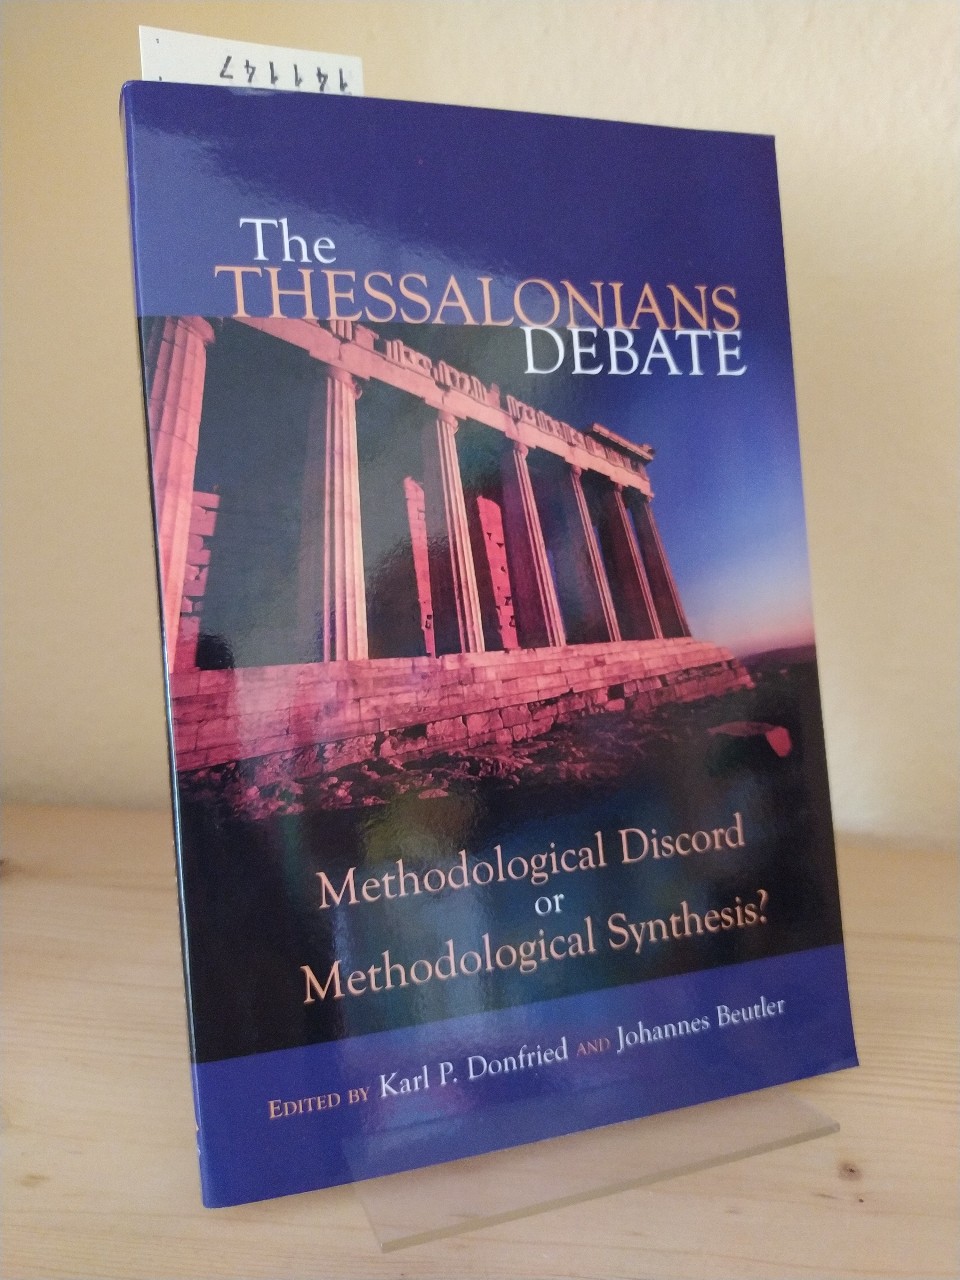 The Thessalonians Debate. Methodological Discord or Methodological Synthesis? [Edited by Karl P. Donfried and Johannes Beutler]. - Beutler, Johannes (Ed.) and Karl P. Donfried (Ed.)